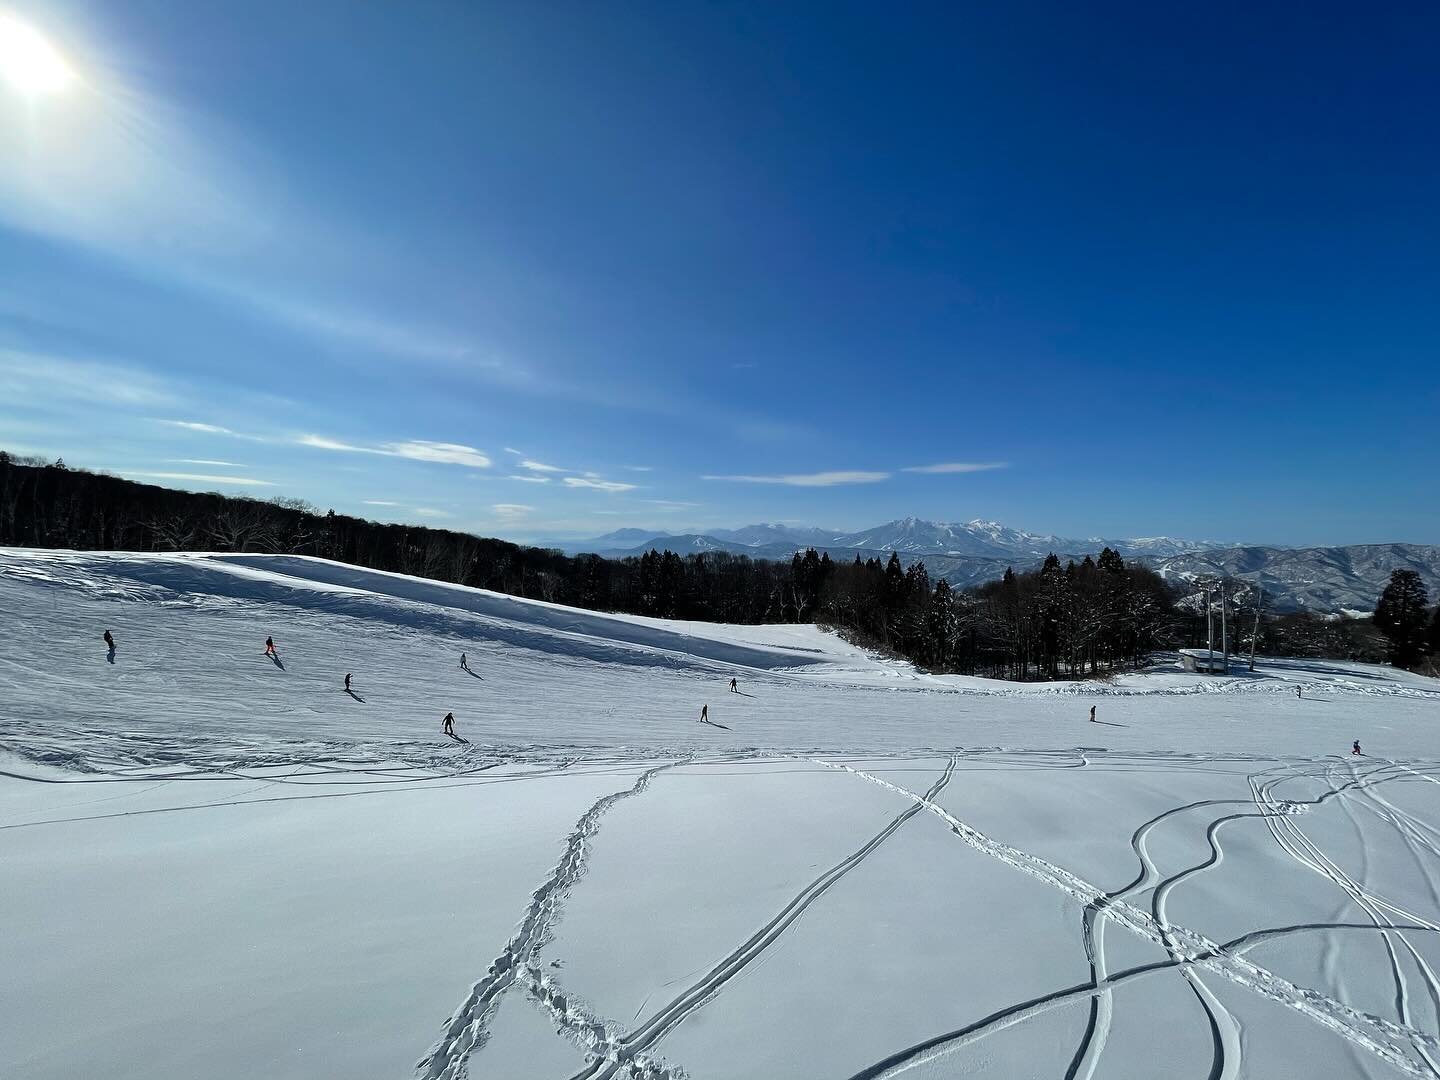 Blue sky, stunning views and more runs open here in Nozawa Onsen. Happy to see more runs opening up for the busy new years weekend. 

Karasawa connector lift has opened for the first time this season and makes access to the resort easy if you stay #a